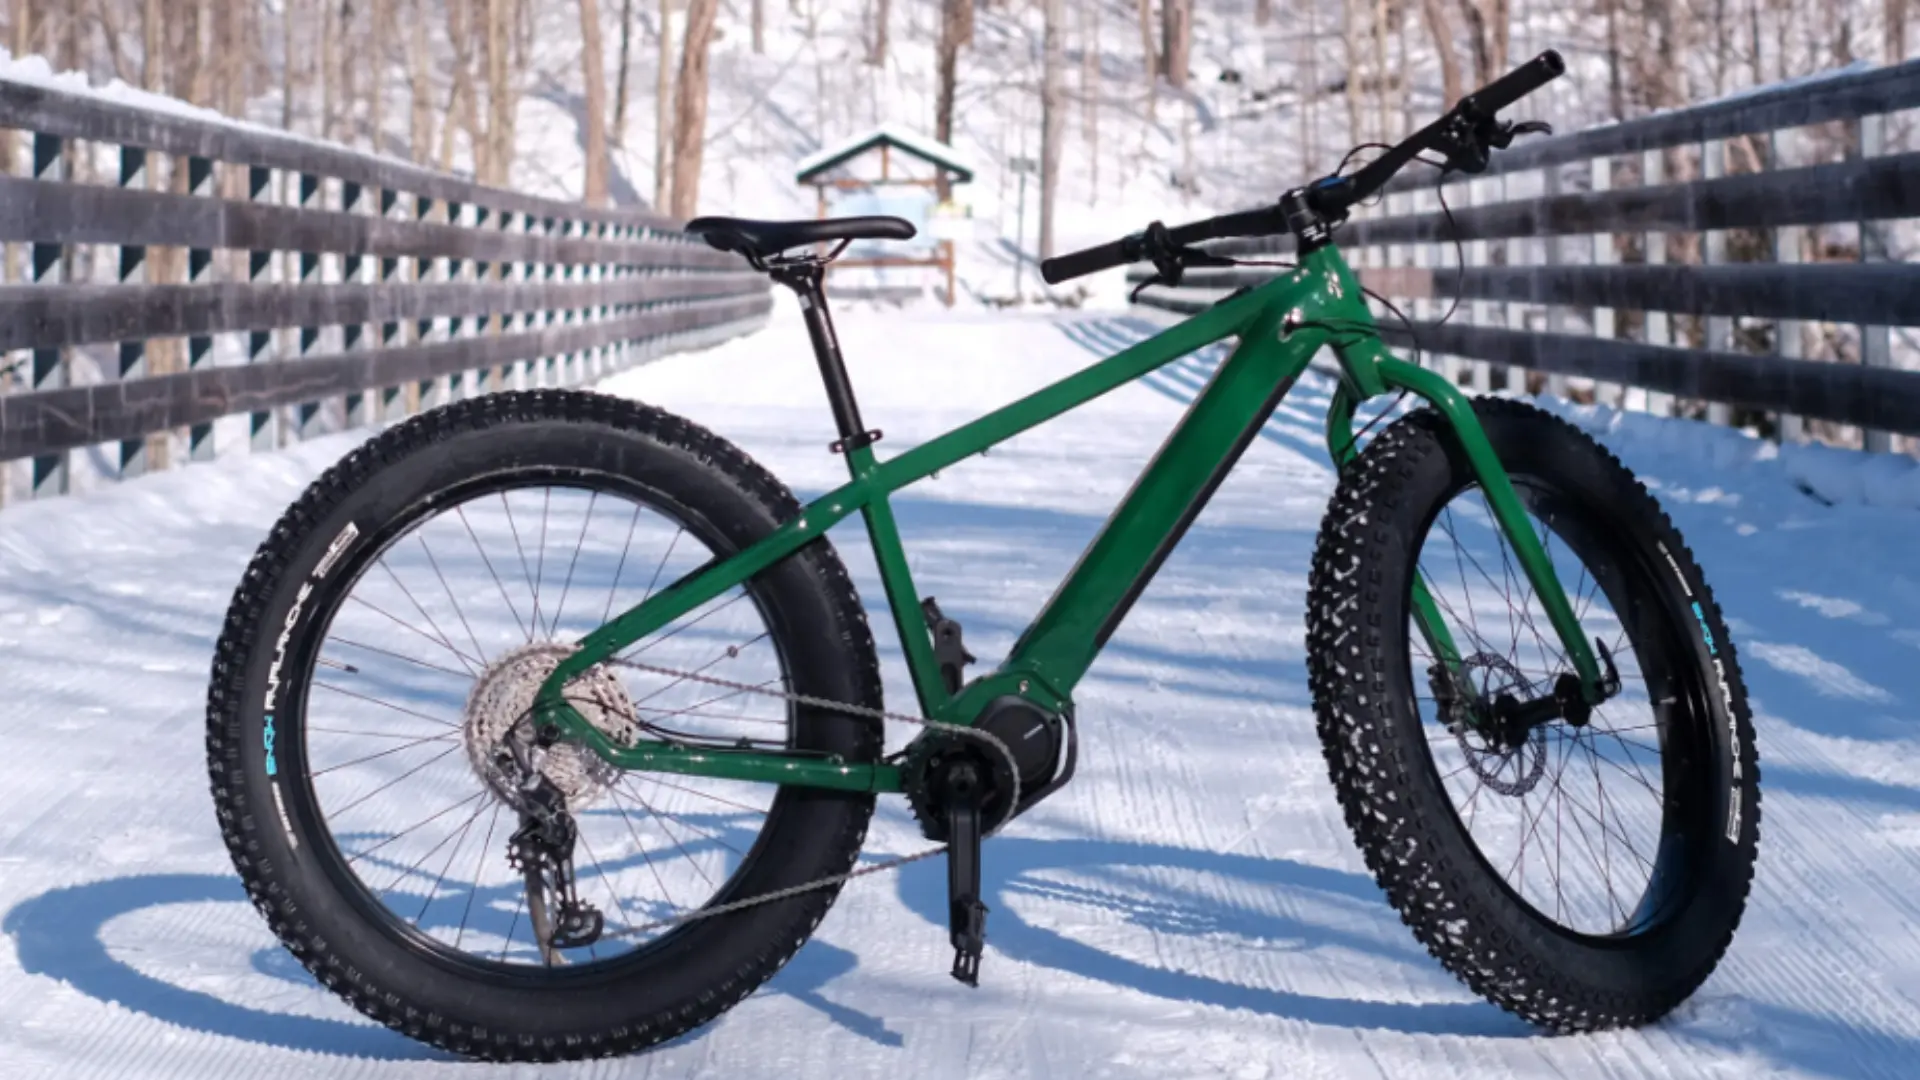 Should You Ride Your Ebike in Snowy Weather